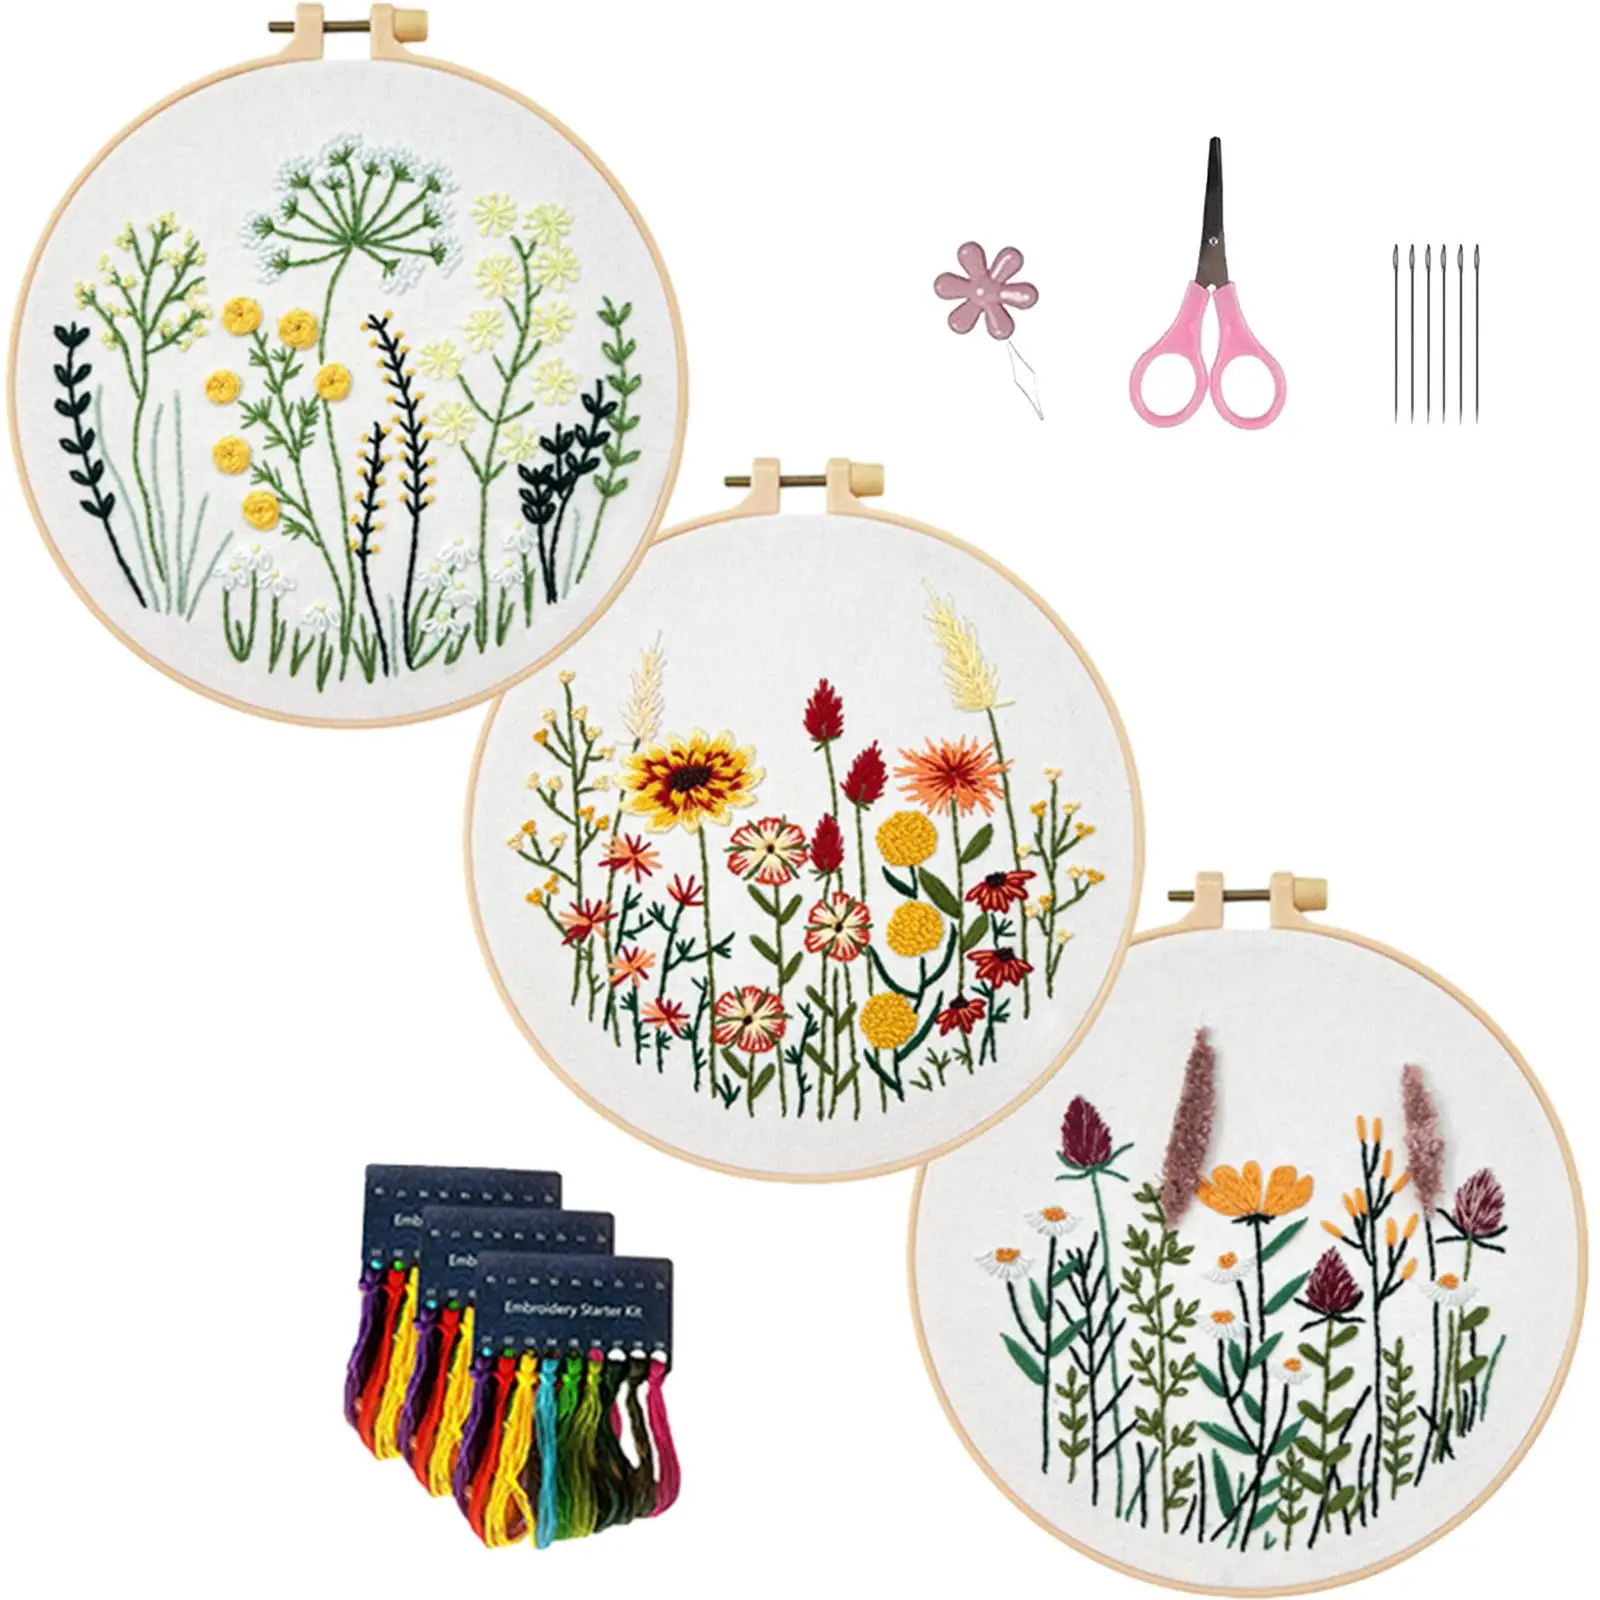 3x Beginner Embroidery Set Scissors Embroidery Hoops Home Decor Flowers Pattern for DIY Projects Hobbyists Handcraft Enthusiast